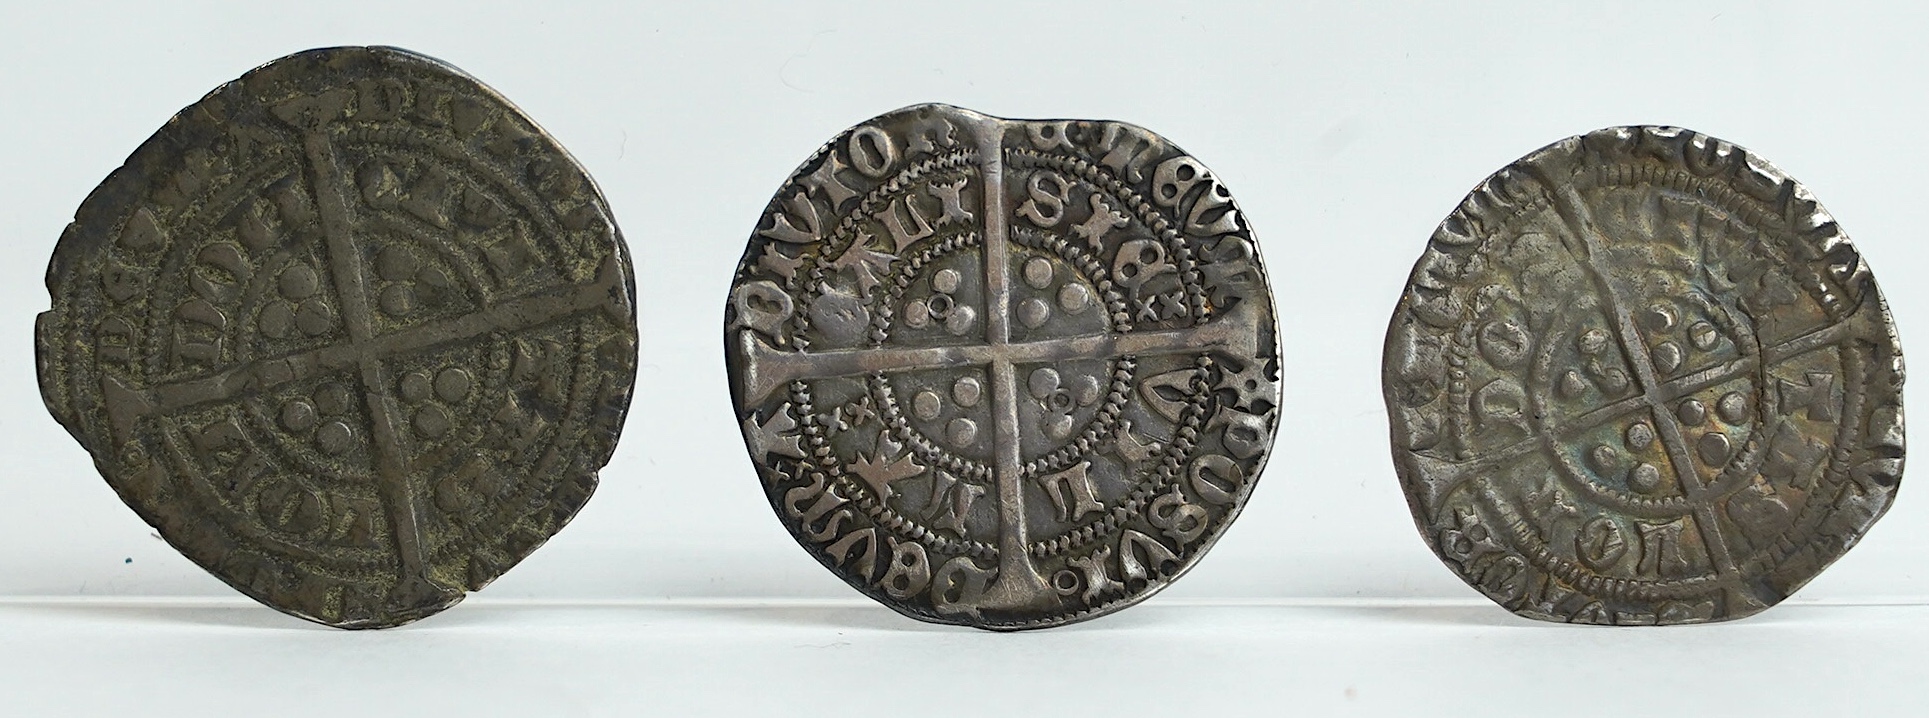 British hammered silver coins, an Edward III (1327-77) groat, 4.4g, a Henry VI (1422-61) groat, annulet issue, c.1422-27, Calais (S1836), VF, 3.7g, and an Edward IV (1451-70) groat, light coinage, quatrefoils at neck, mm